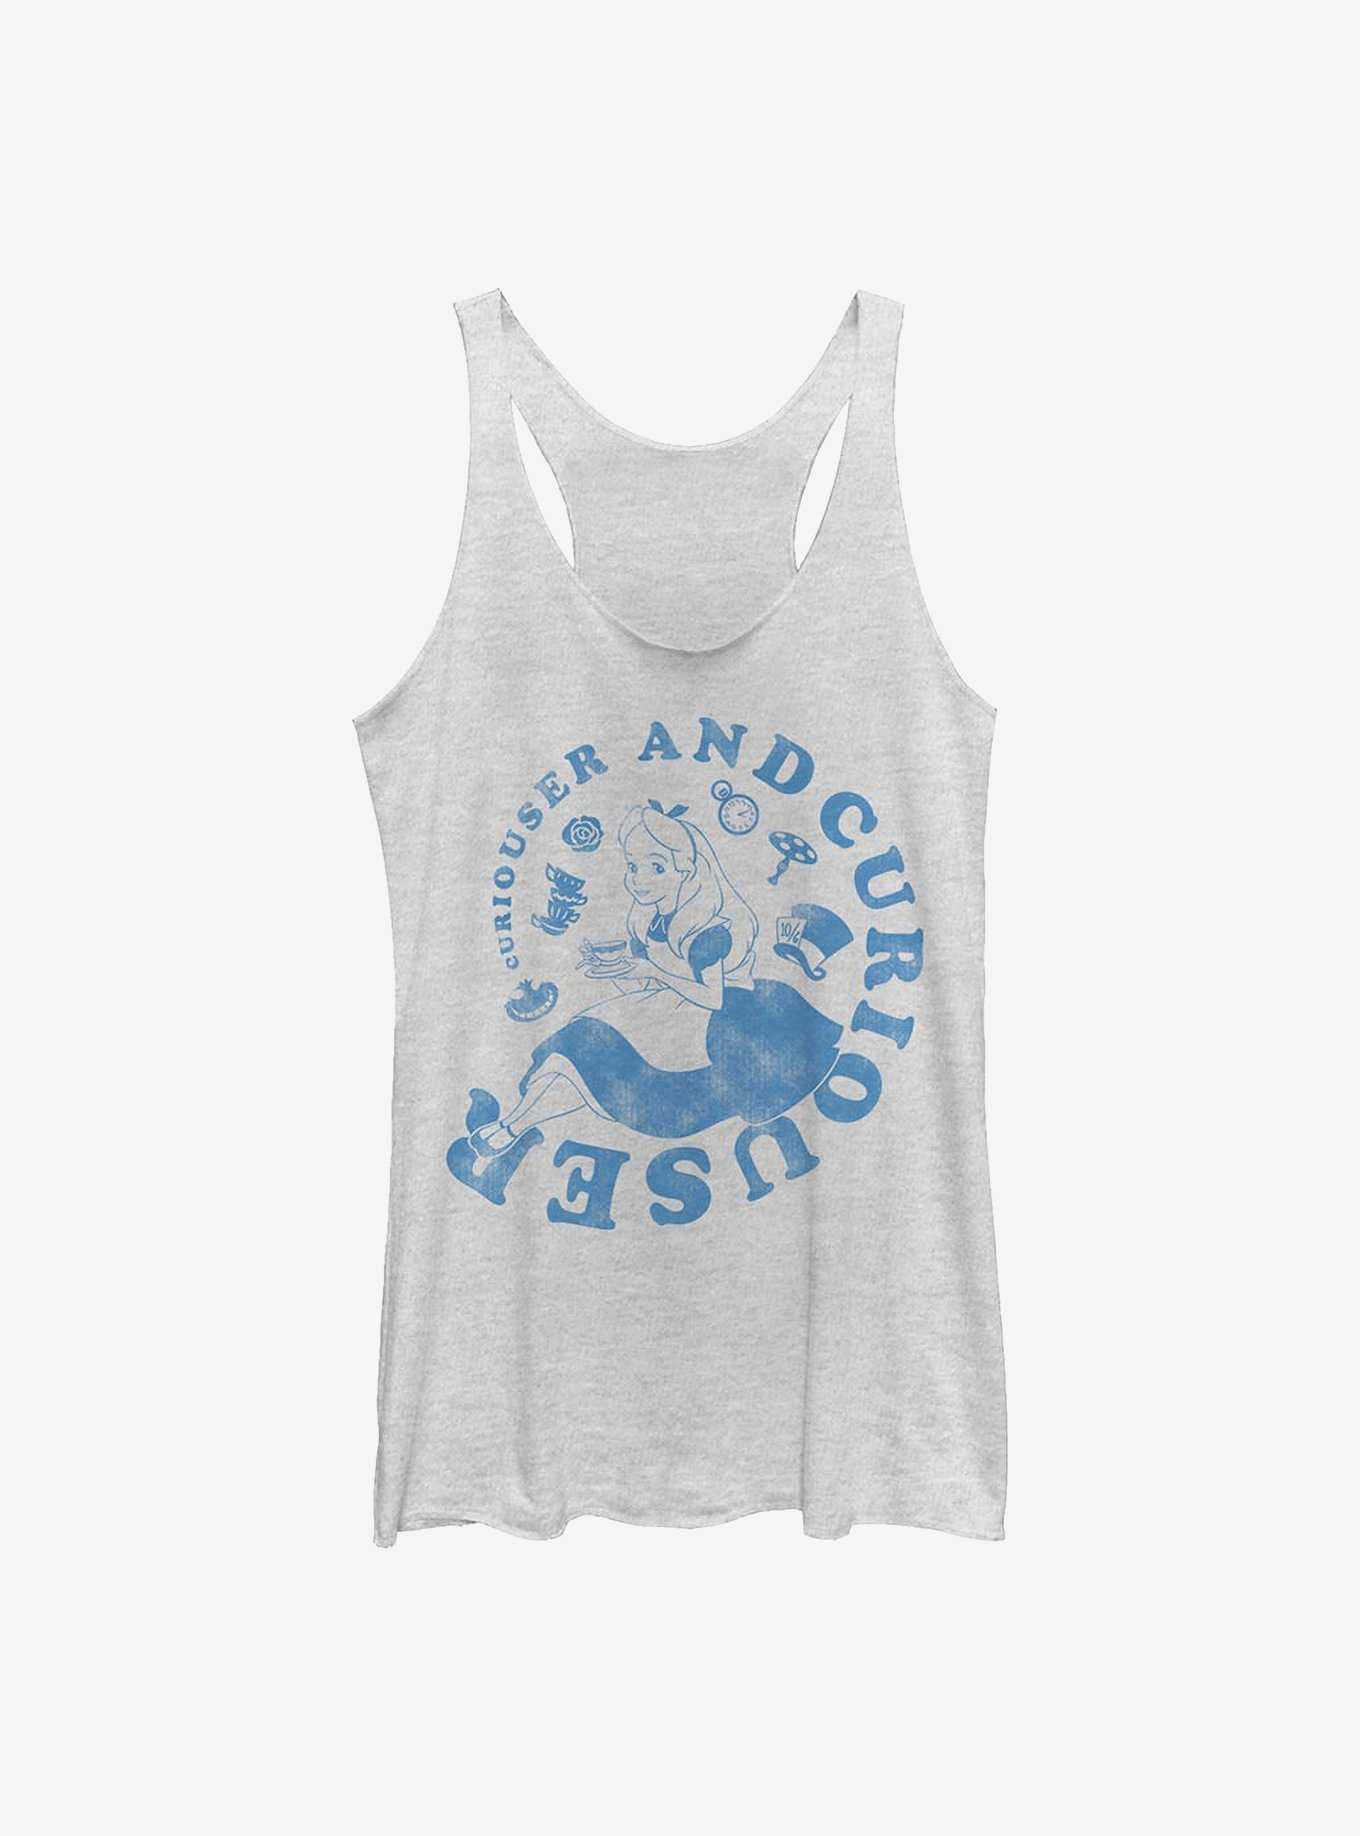 Disney Alice In Wonderland Alice Curiouser And Curiouser Girls Tank, , hi-res